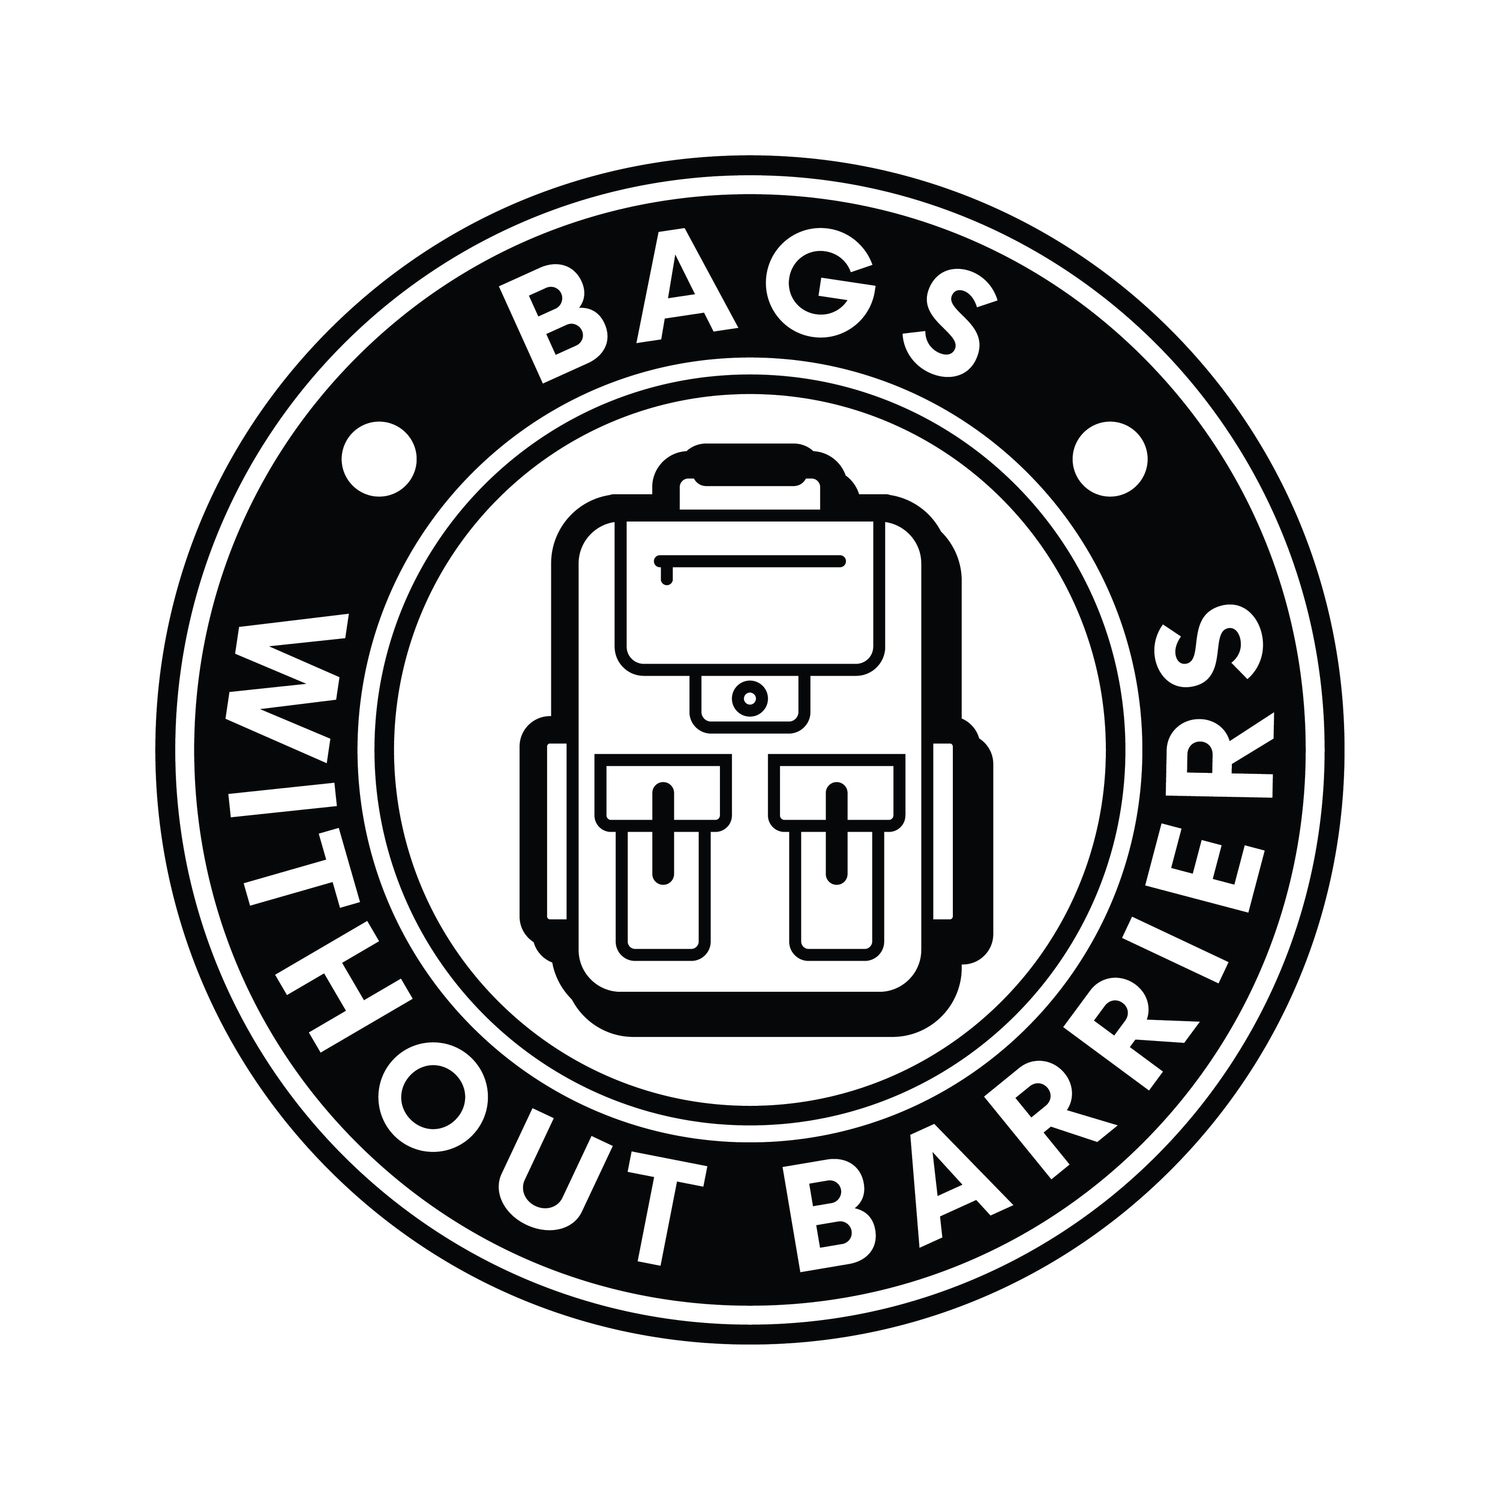 Bags Without Barriers